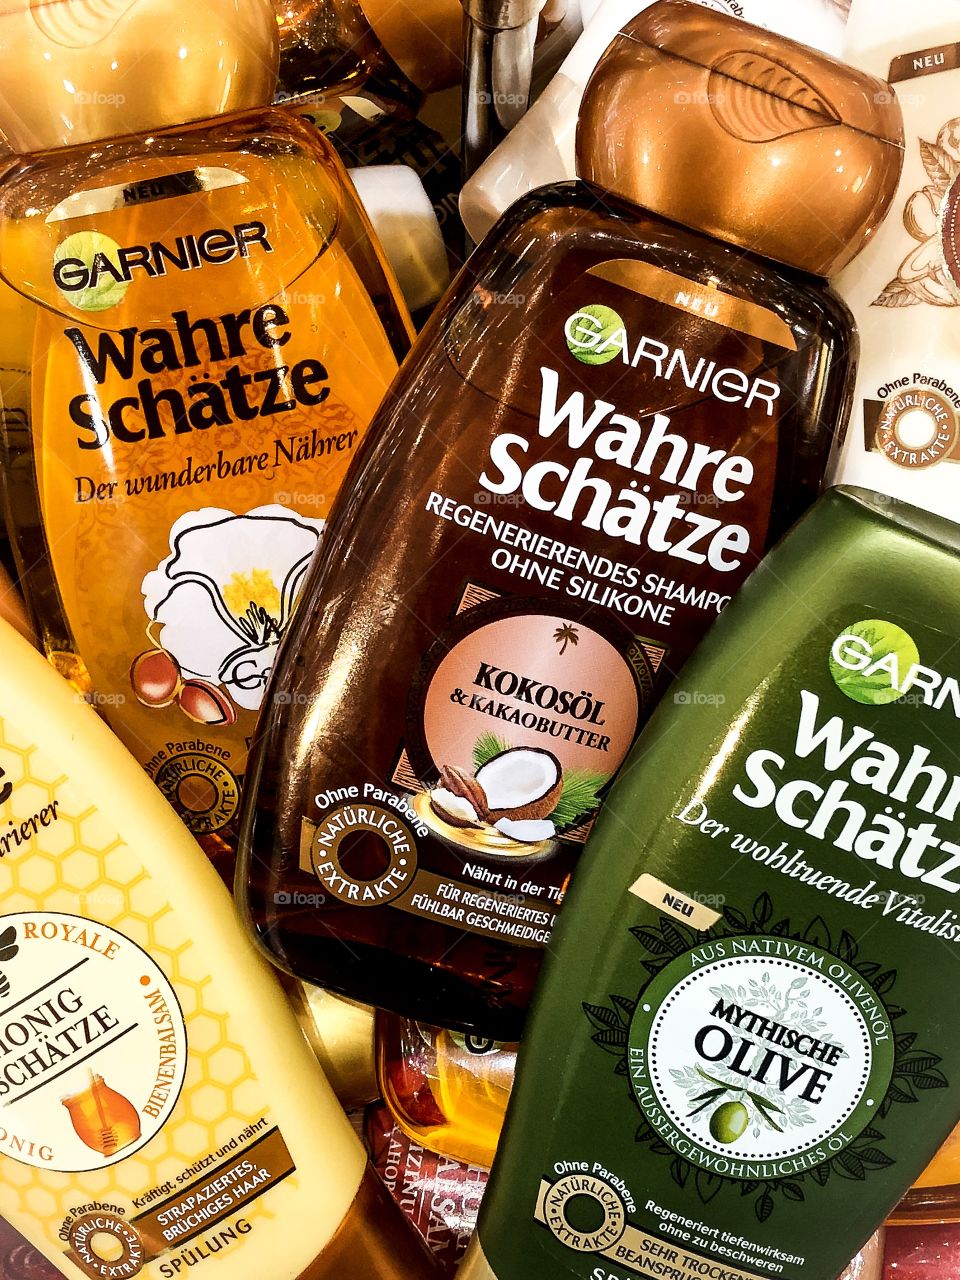 Multiple Garnier Hair shampoos and conditioners layered on each other